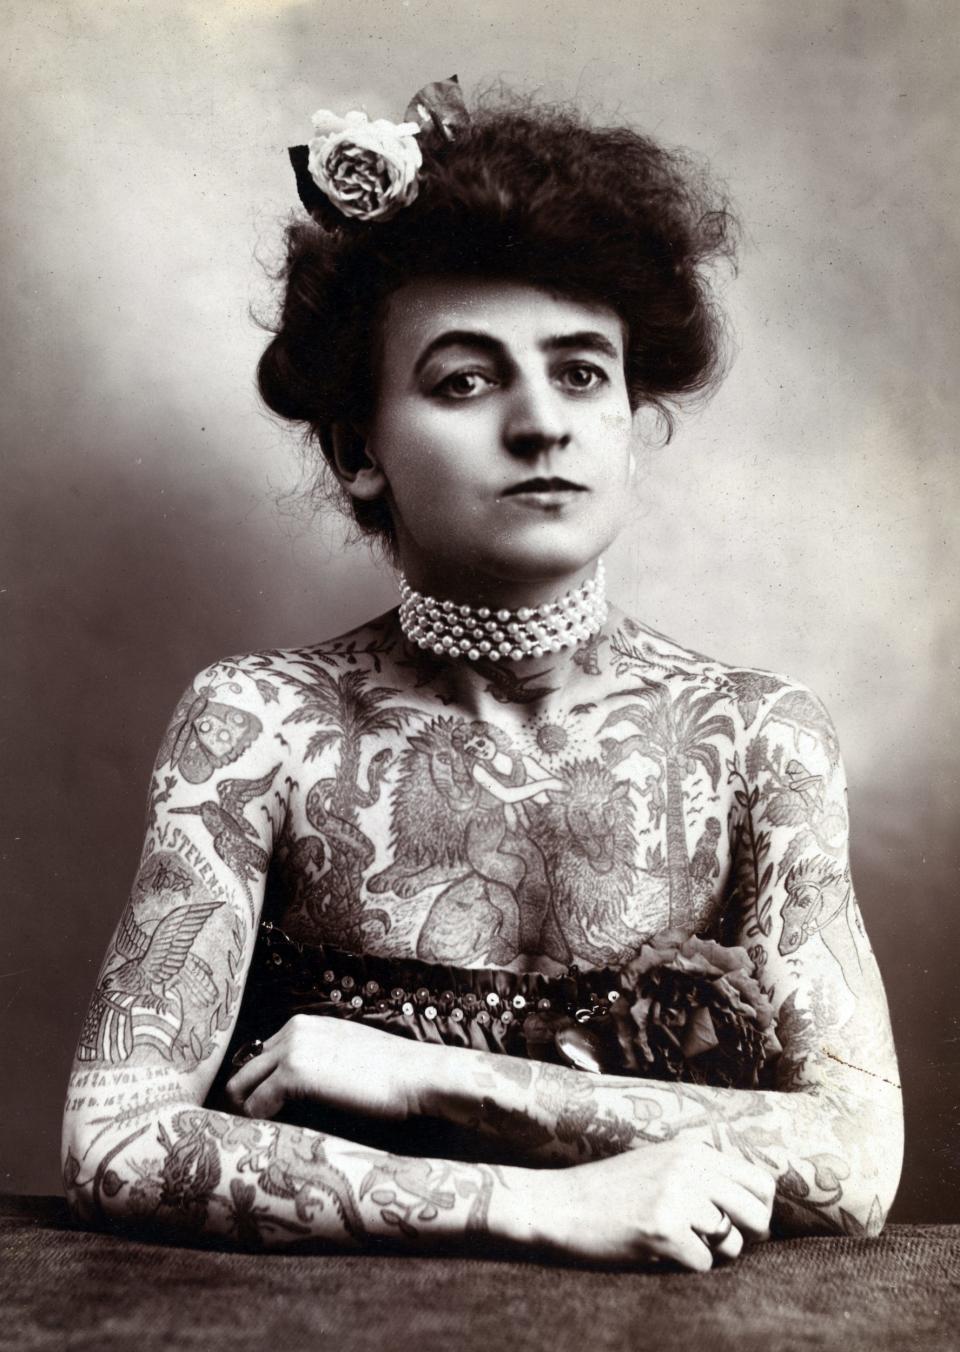 American circus performer Maud Stevens Wagner, one of the first American female tattoo artists